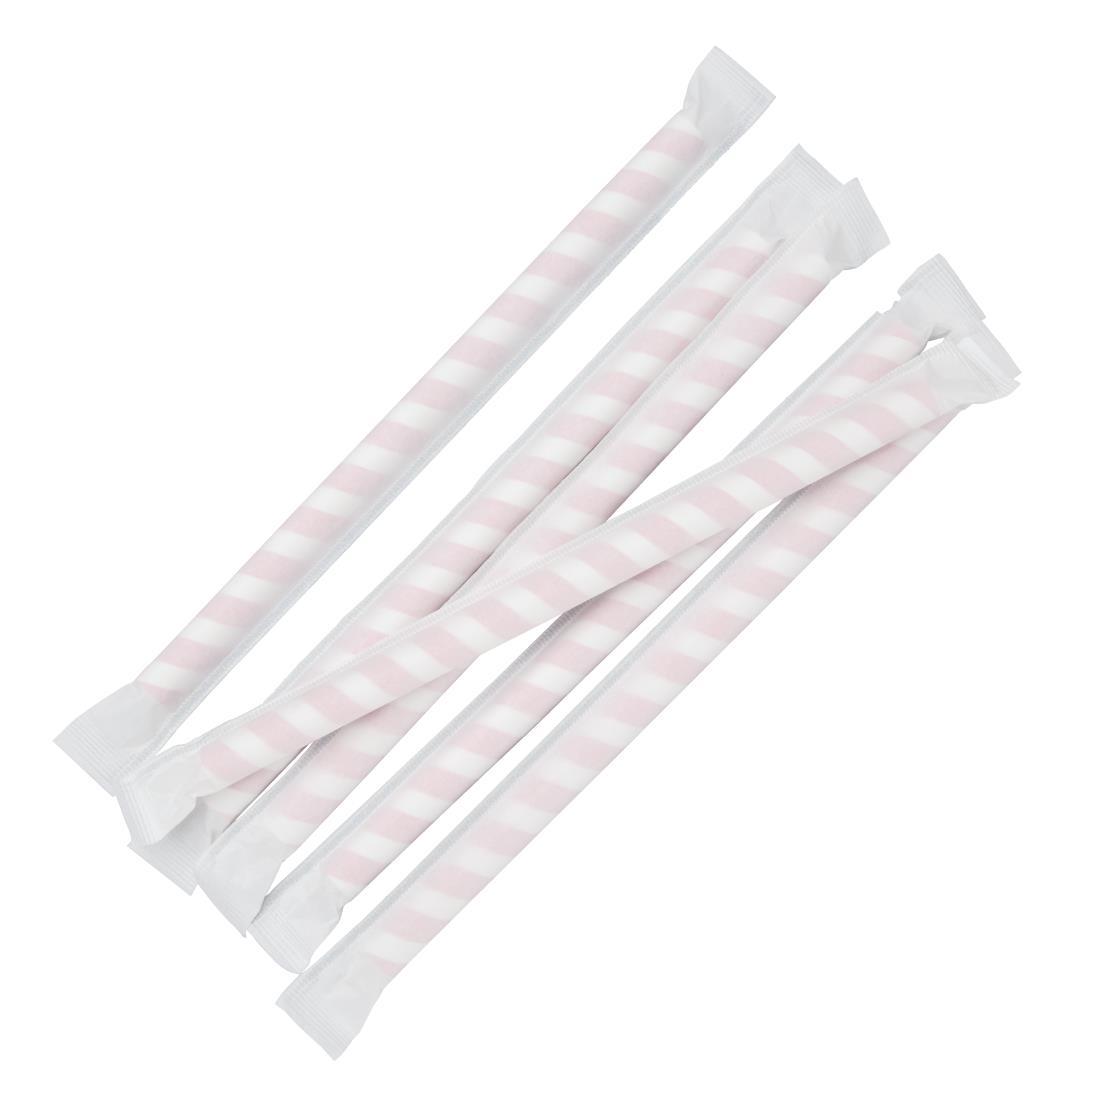 Fiesta Compostable Individually Wrapped Paper Smoothie Straws Red Stripes (Pack of 250) - FP443  - 5